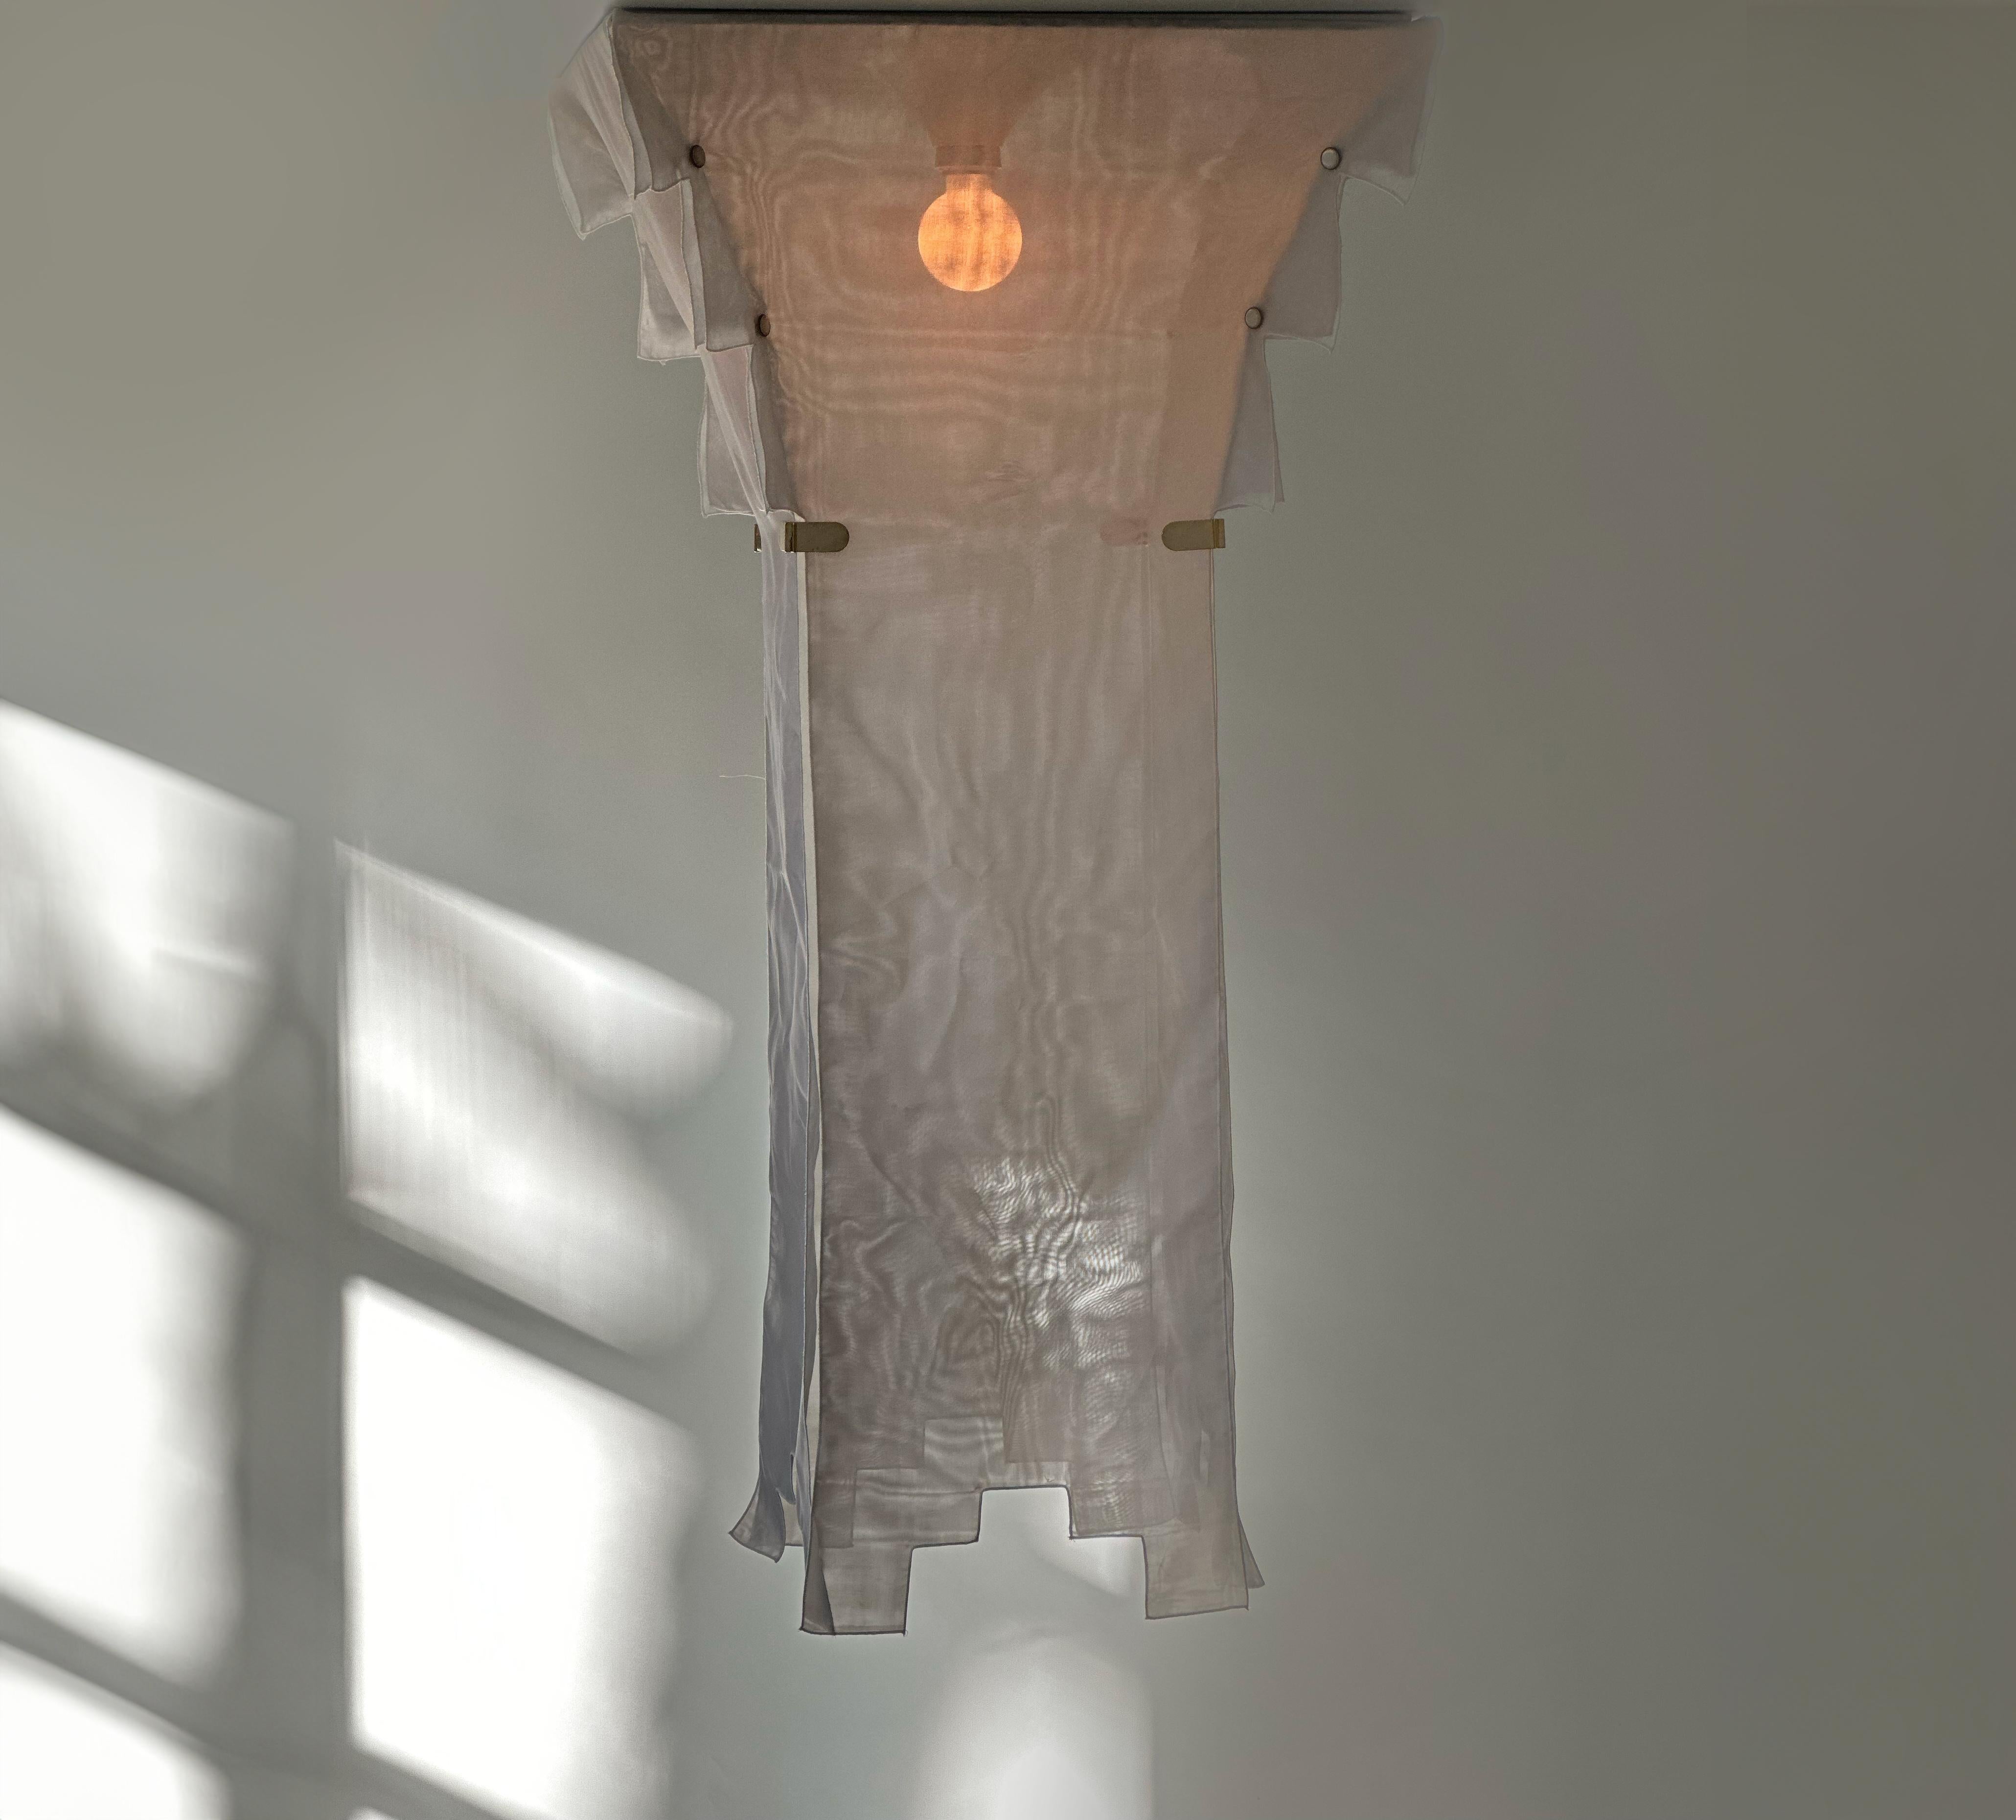 Naeko Chandelier by Kazuhide Takahama for Sirrah, c. 1985. Italy

Naeko Chandelier designed by Kazuide Takahama and manufacutred in Italy by SIrrah. This light features removeable white silk like fabric panels connected by brass clips and pearl